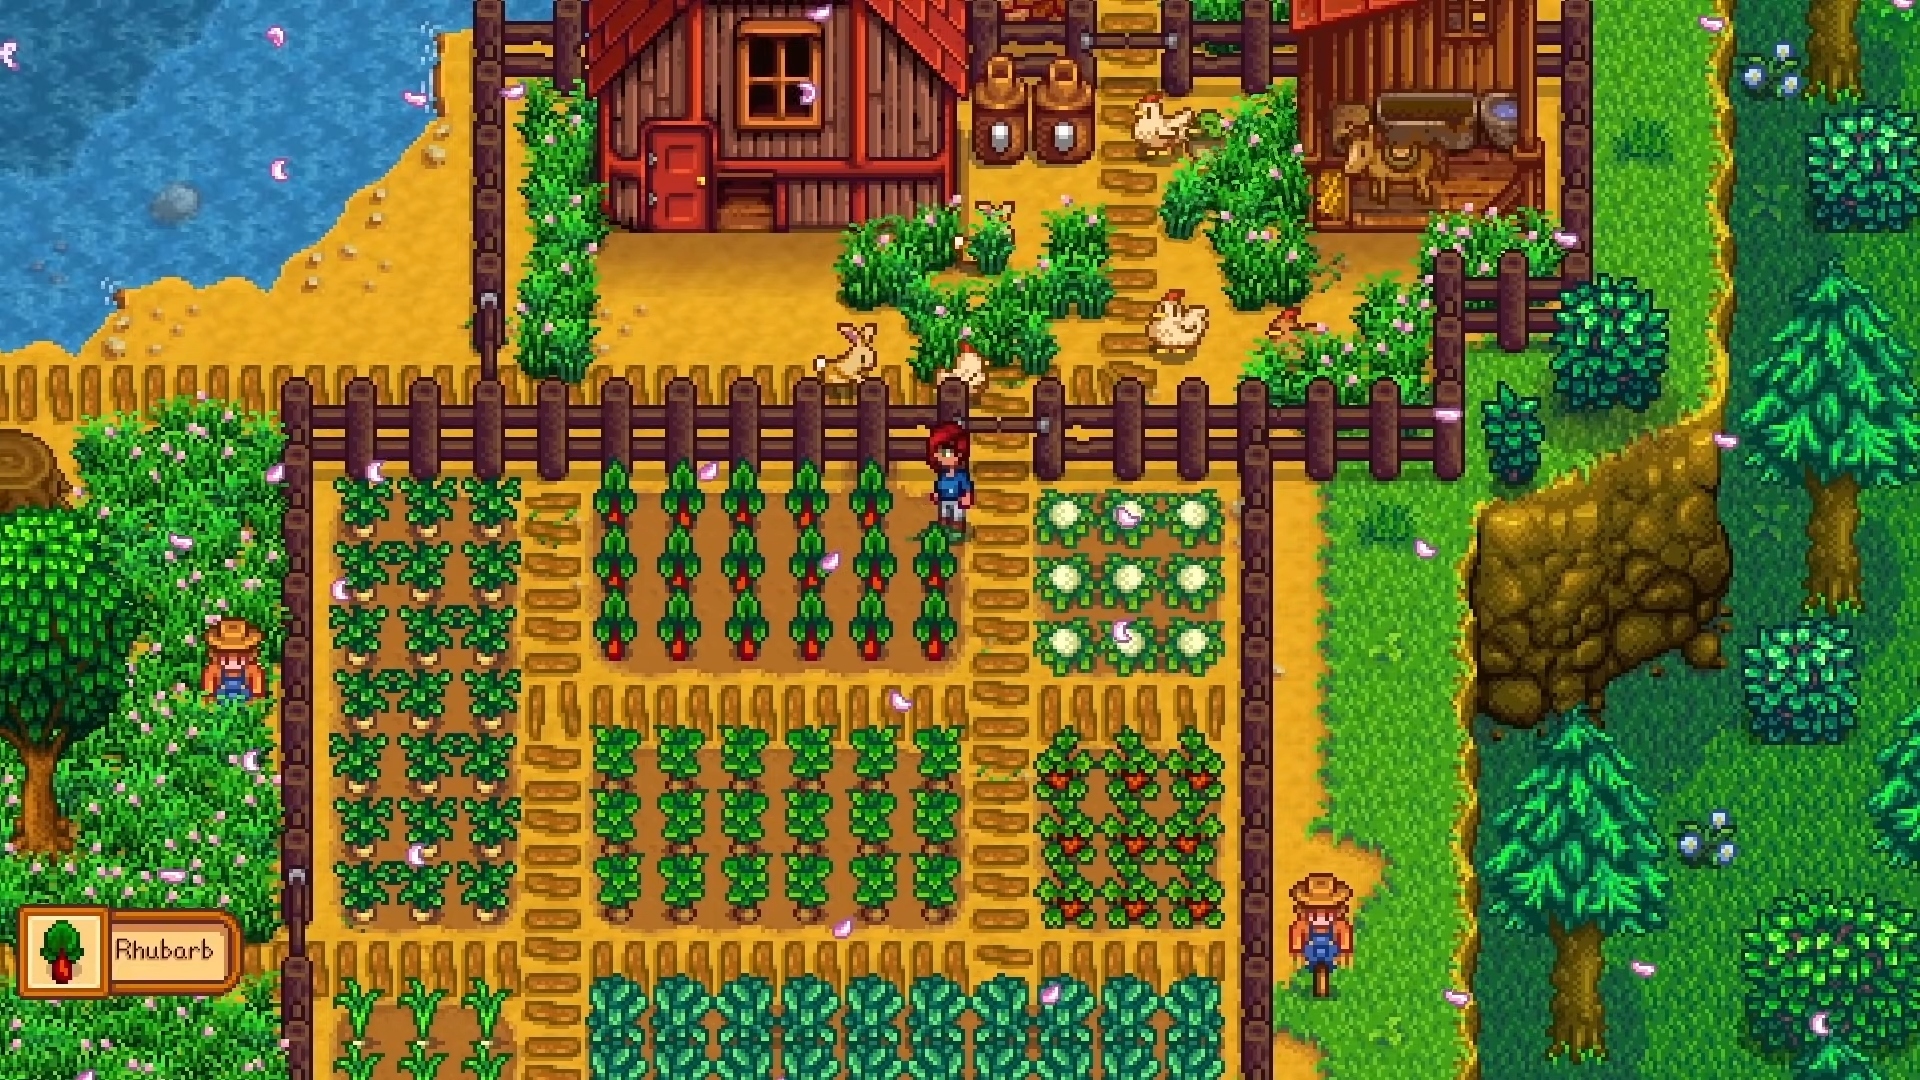 Best farm games - Stardew Valley. A screenshot shows a player character standing amidst many types of crops, with their home not far behind.